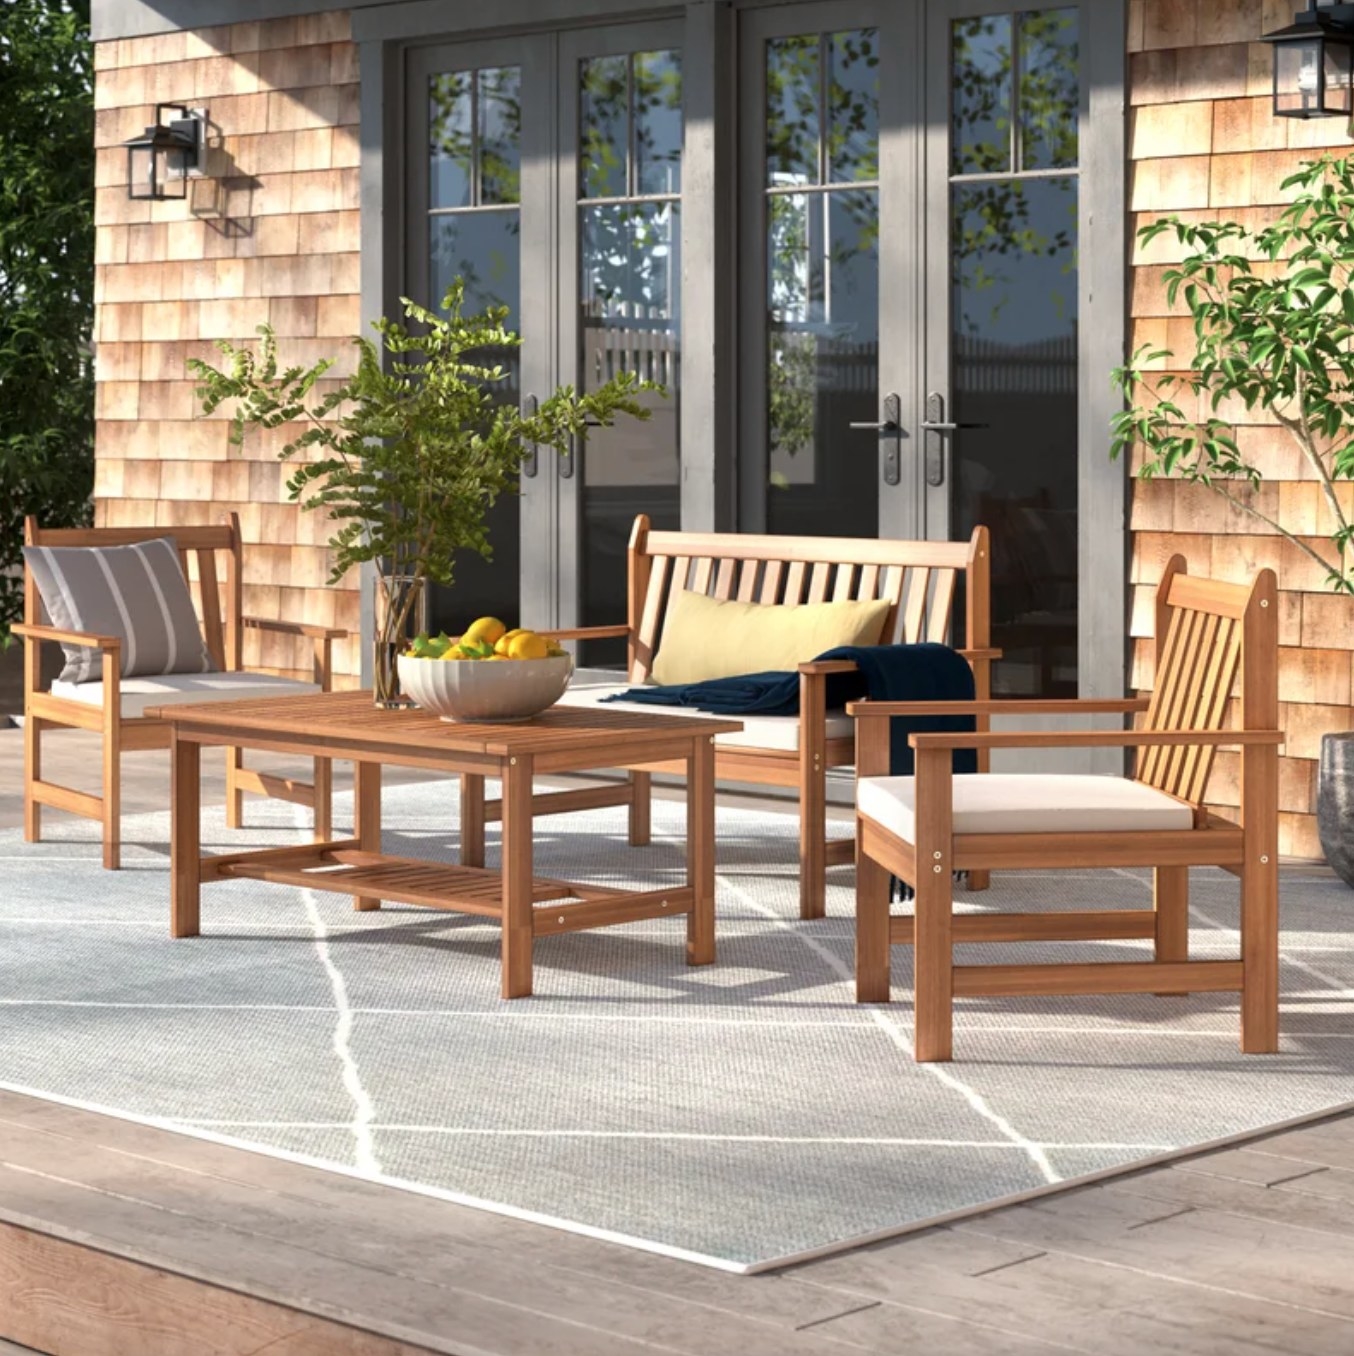 the light wood coffee table, chairs and loveseat. the chairs and sofa have light cushions, and the whole set is on a light outdoor rug on a deck